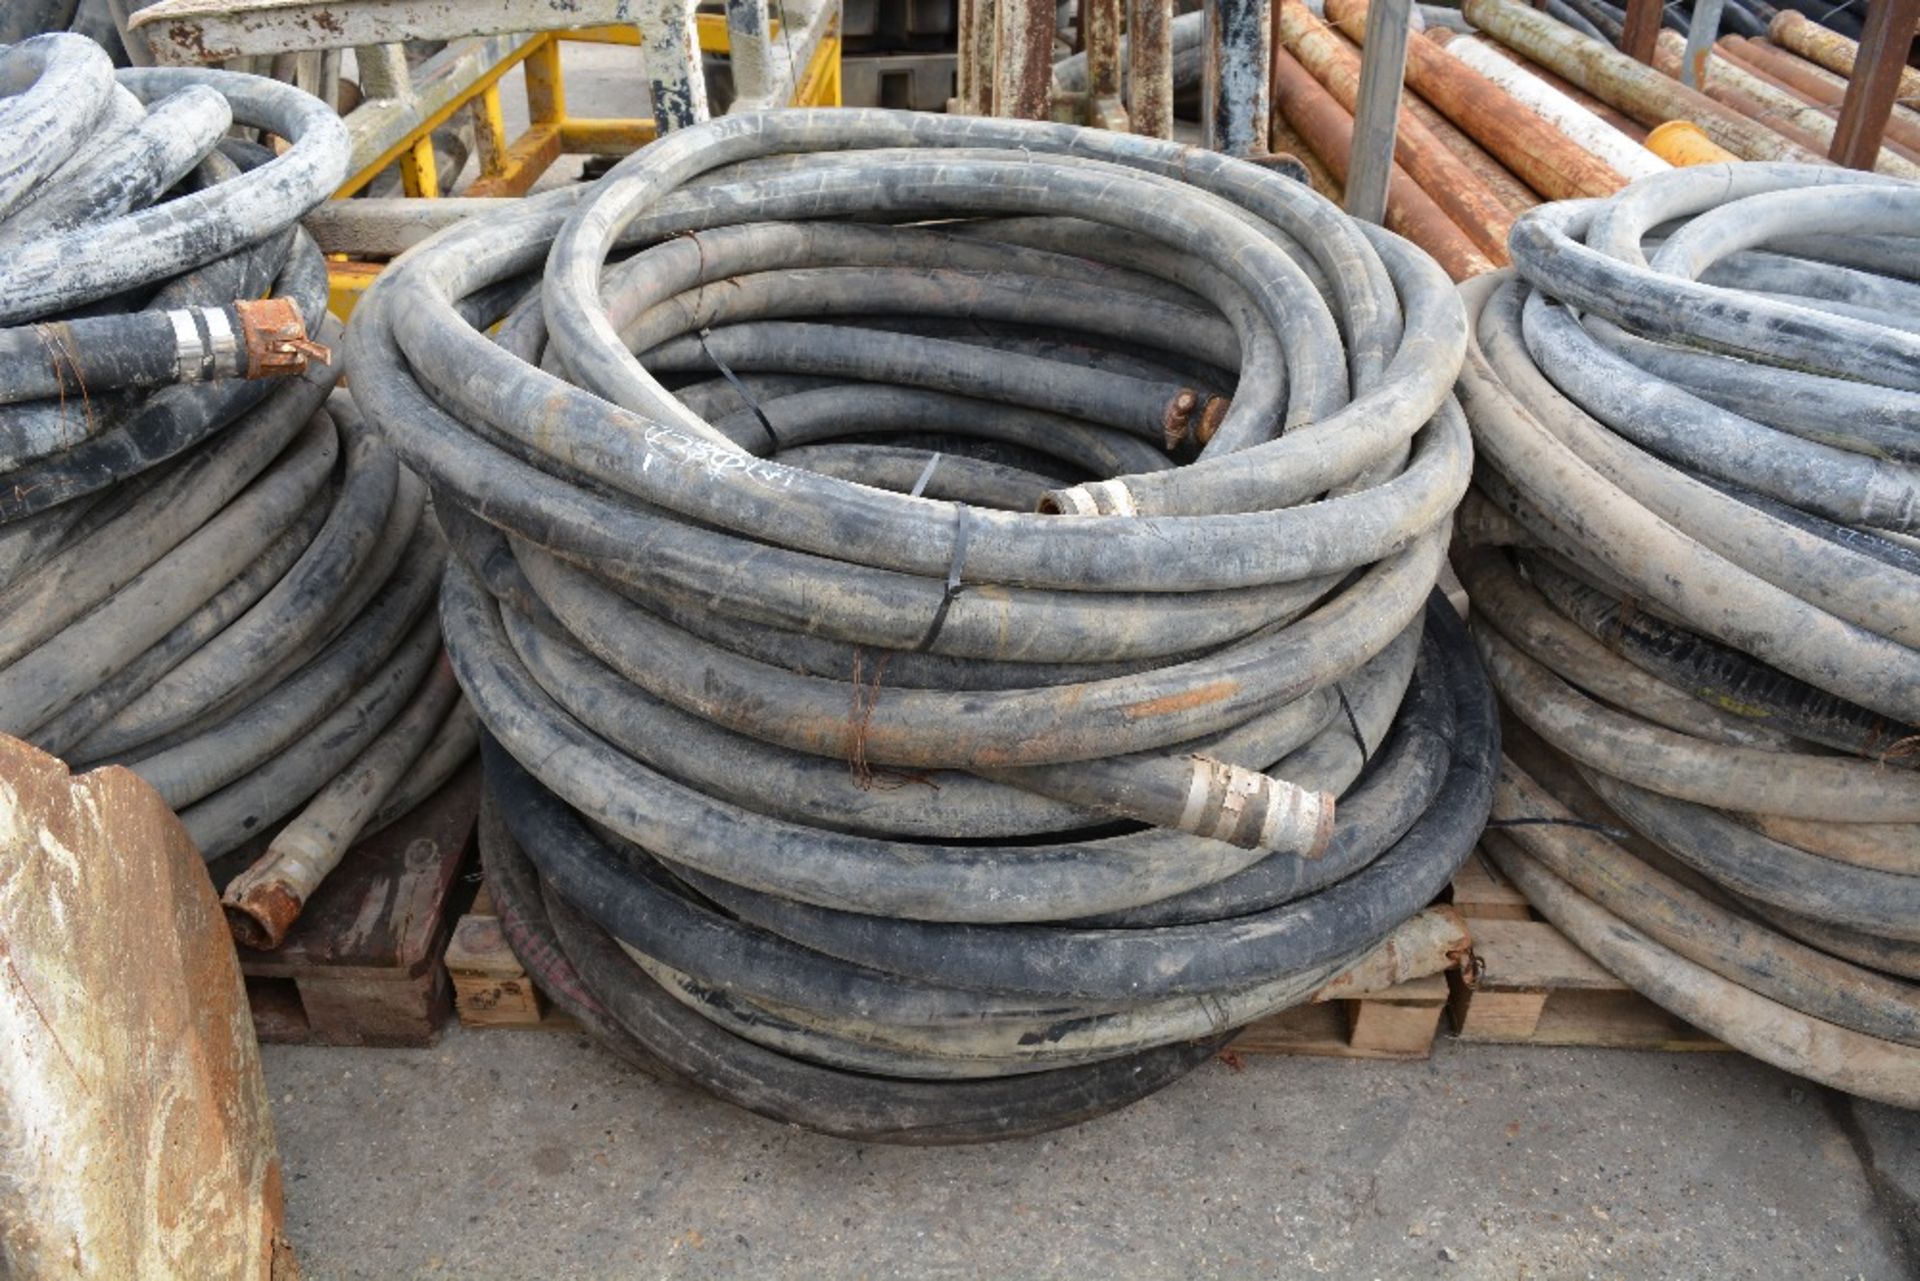 ASSORTED GROUT / SCREED PIPES (1 PALLET), ID: PL-15663, RUISLIP PLANT HIRE LTD. *UNRESERVED*